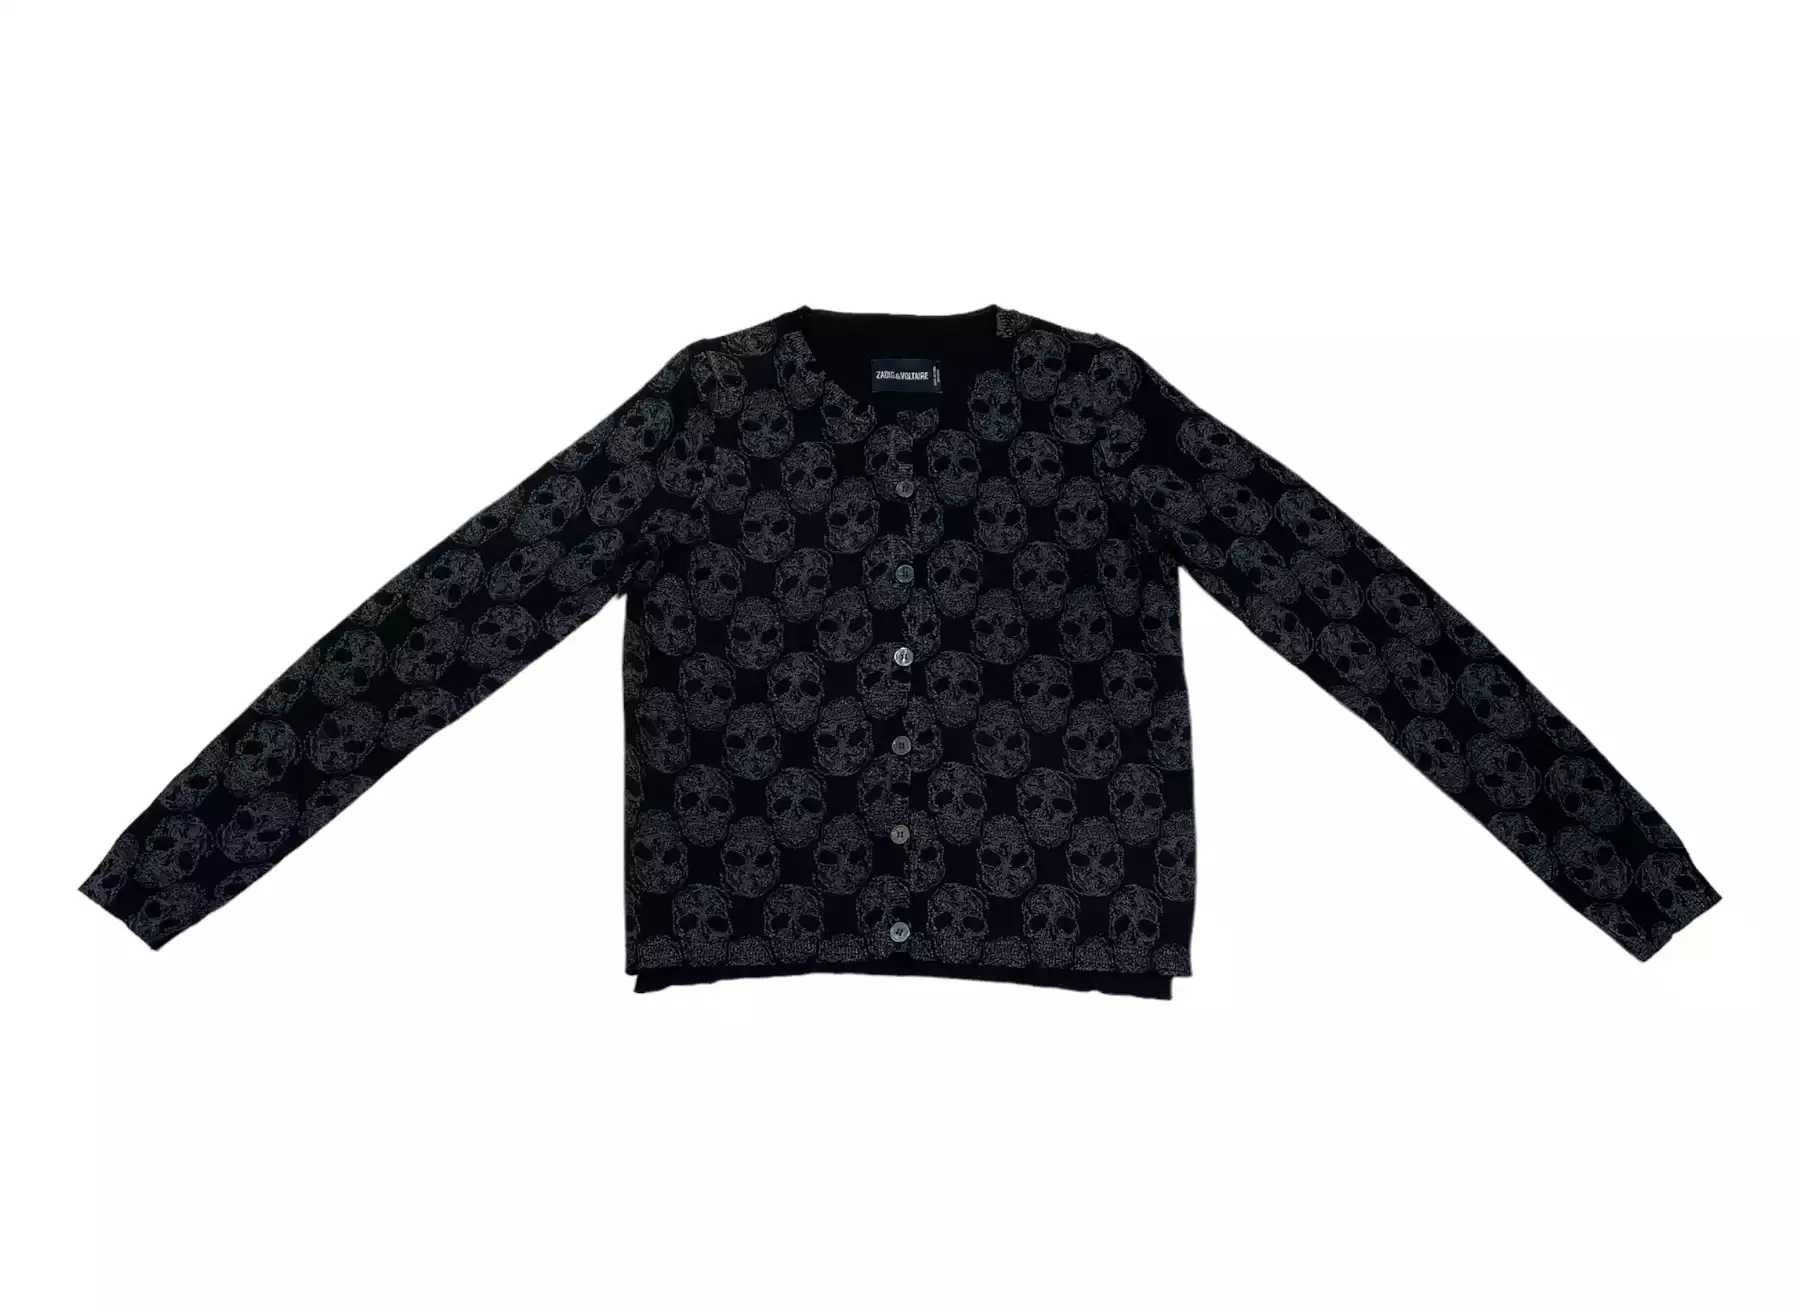 Sweater by Zadig & Voltaire